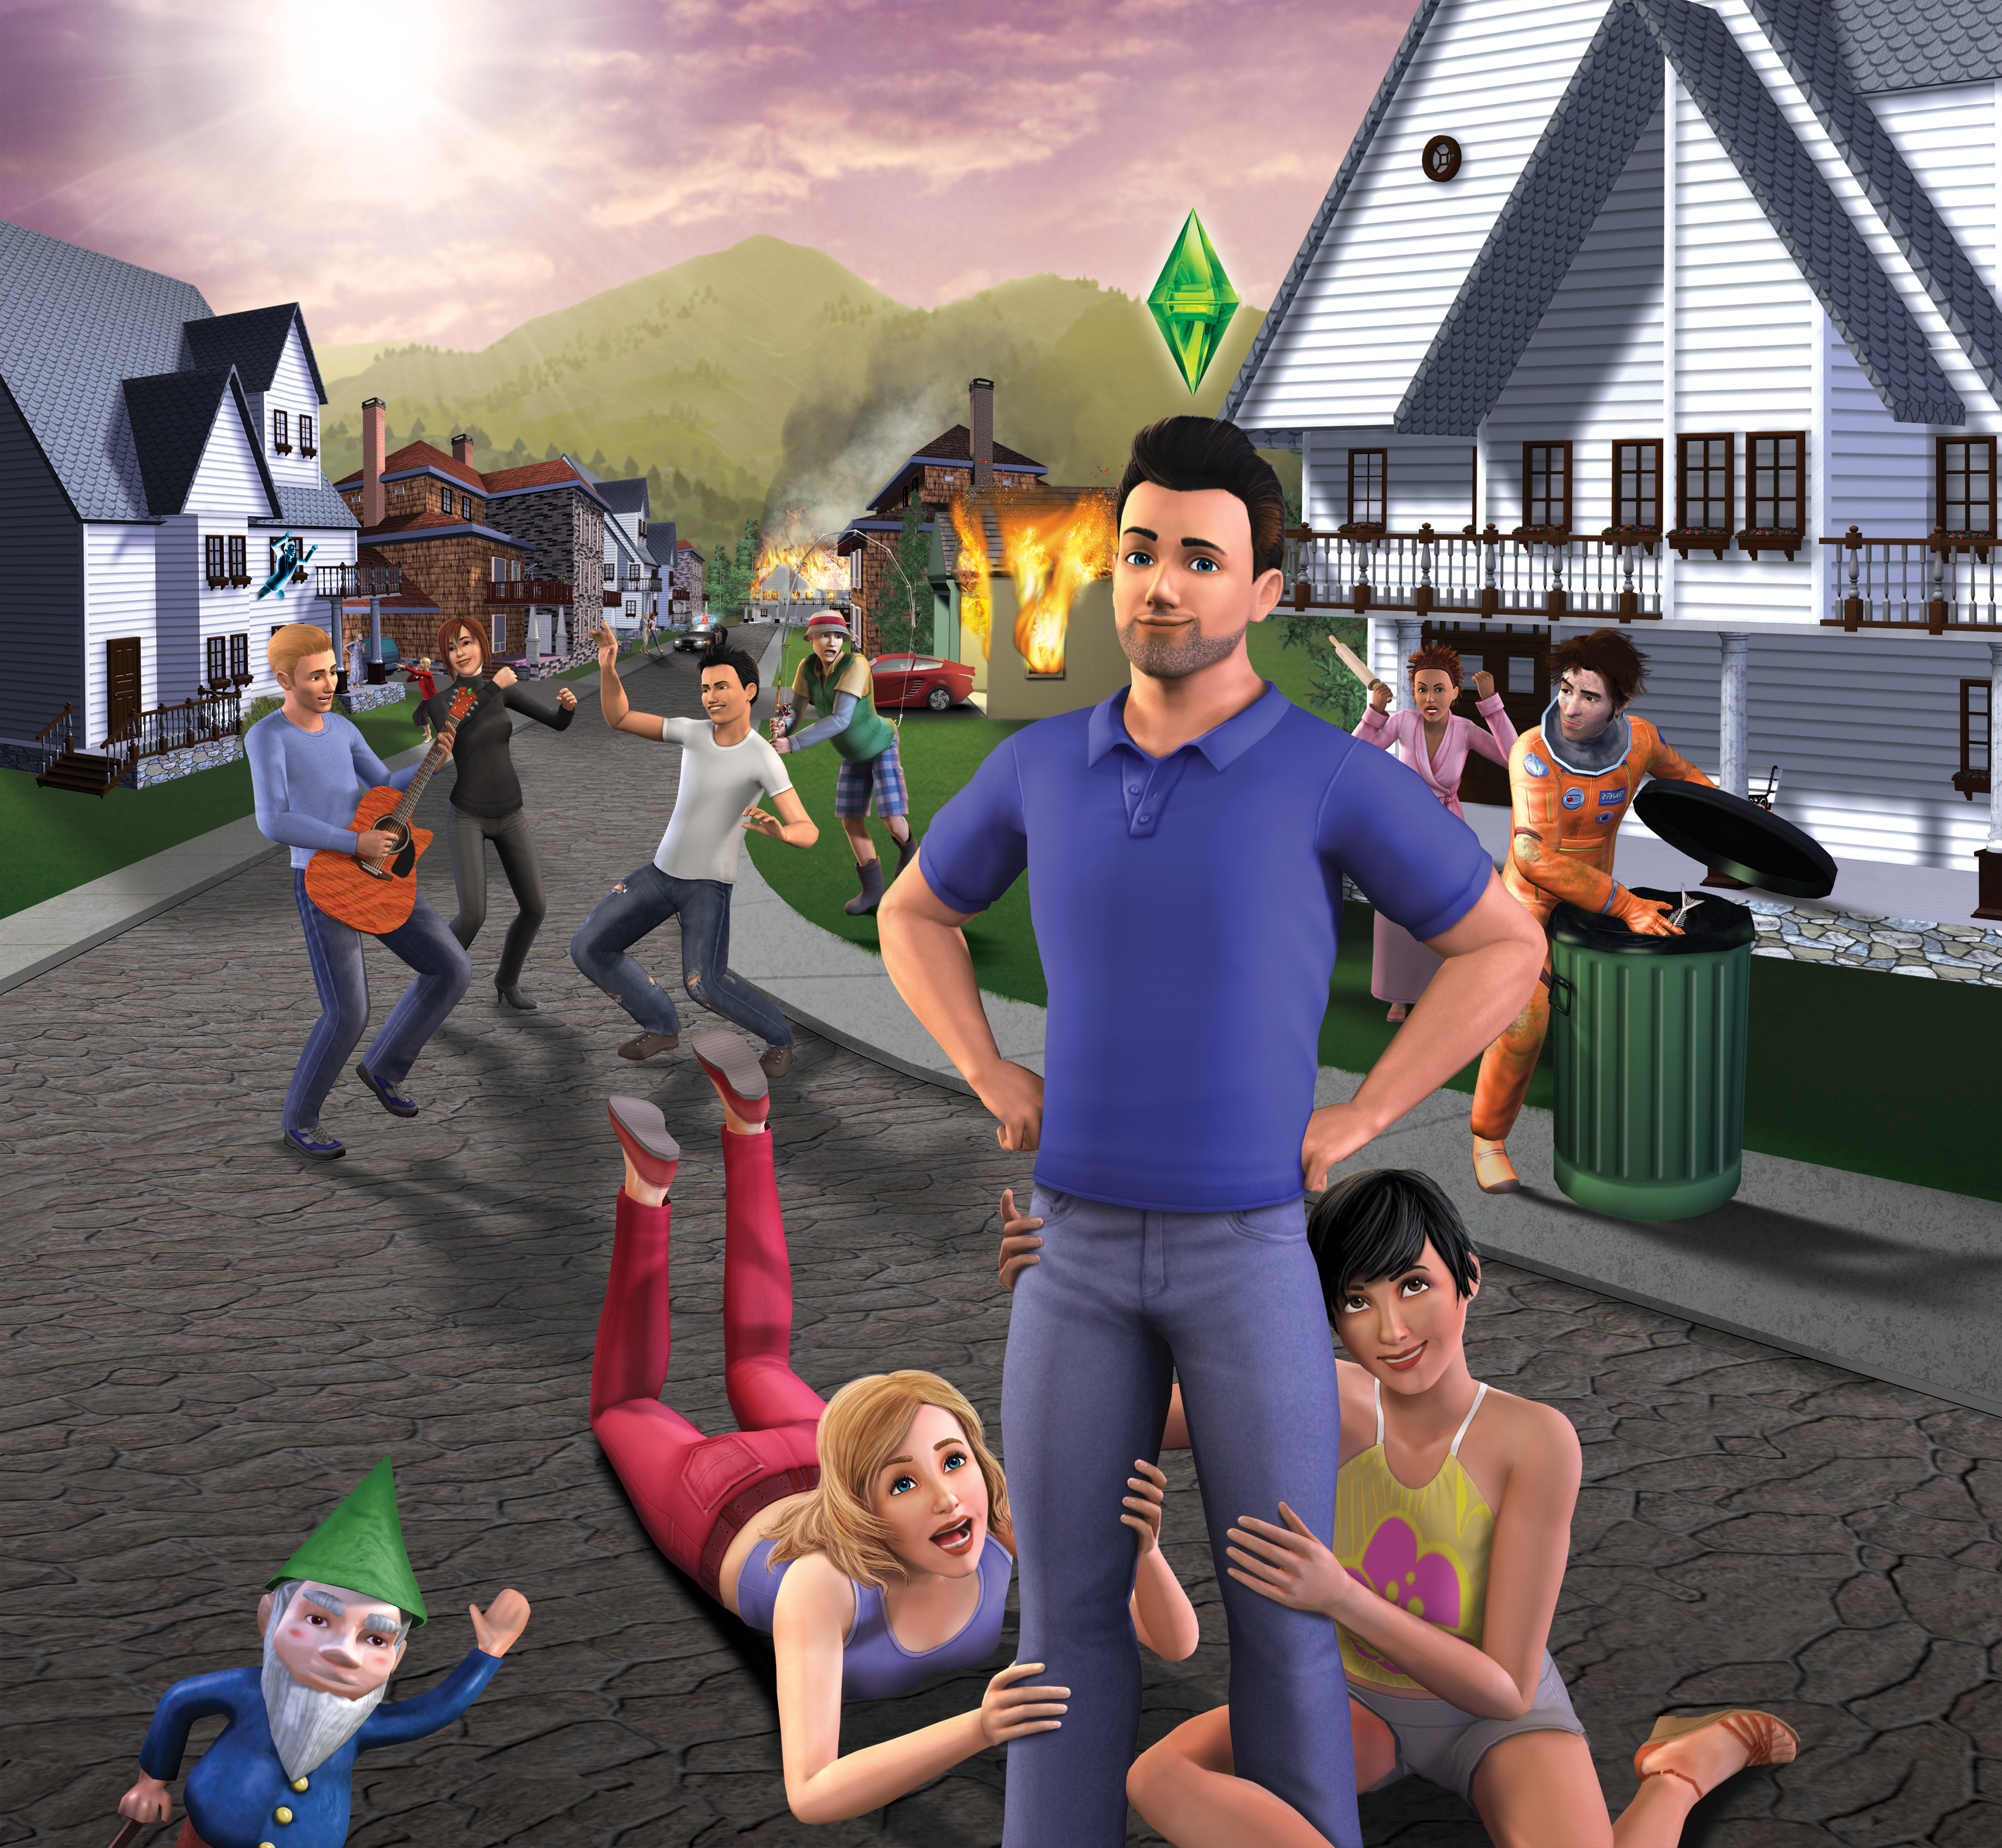 General 3840x3544 The Sims 3 Electronic Arts street video game art looking at viewer standing video games beard house building clouds mountains trash bin gnomes